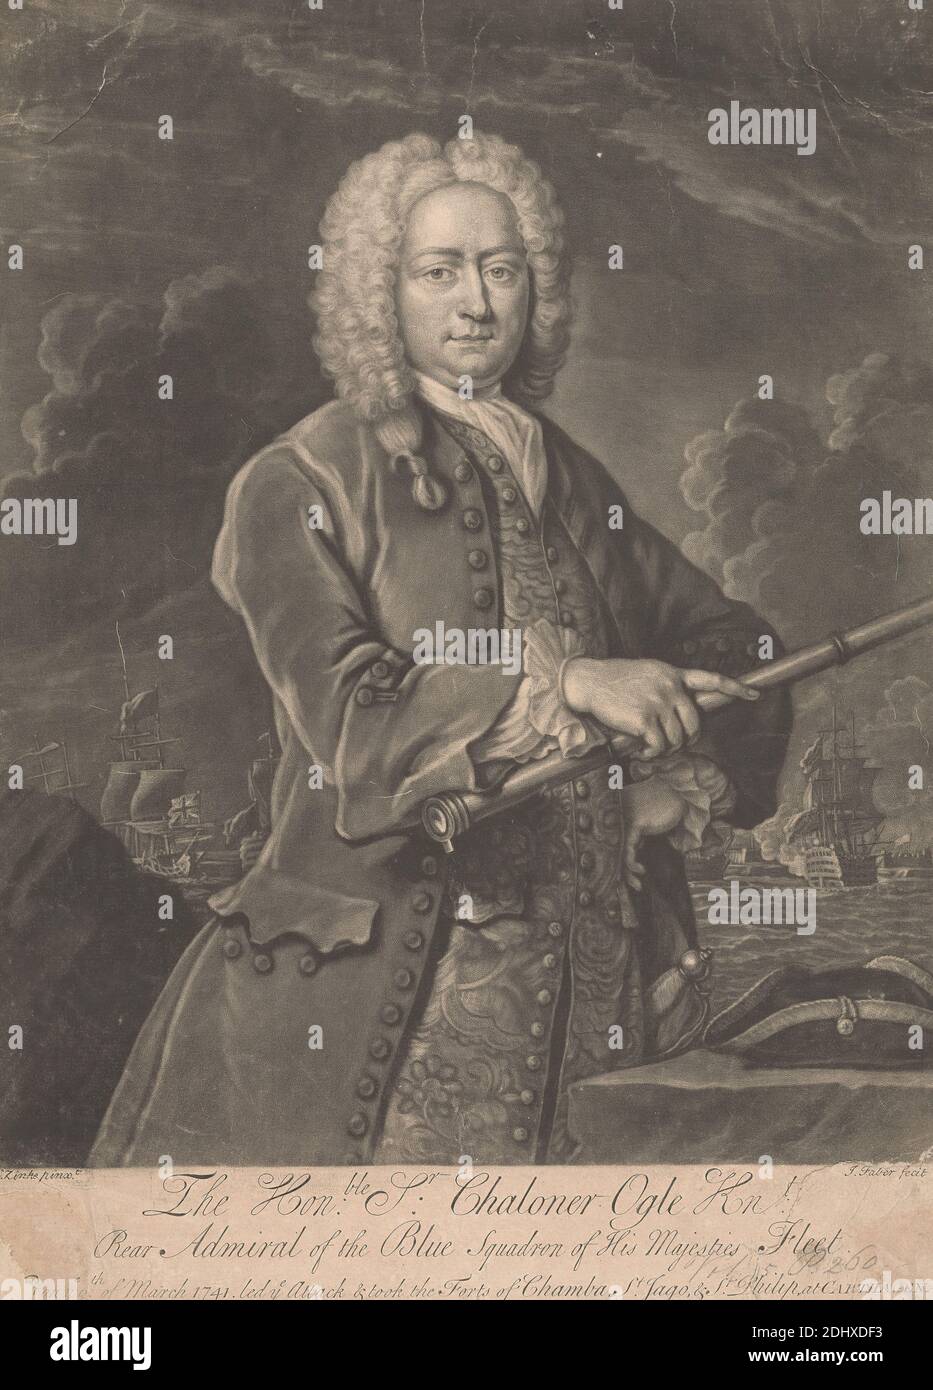 Sir Chaloner Ogle, John Faber the Younger, ca. 1695–1756, Netherlandish, active in Britain, after Christian Friedrich Zincke, 1685–1767, German, undated, Mezzotint on thin, slightly textured, beige, laid paper, mounted on moderately thick, moderately textured, cream, laid paper, Sheet: 13 11/16 × 9 15/16 inches (34.8 × 25.2 cm) and Image: 12 3/16 × 9 7/8 inches (31 × 25.1 cm Stock Photo